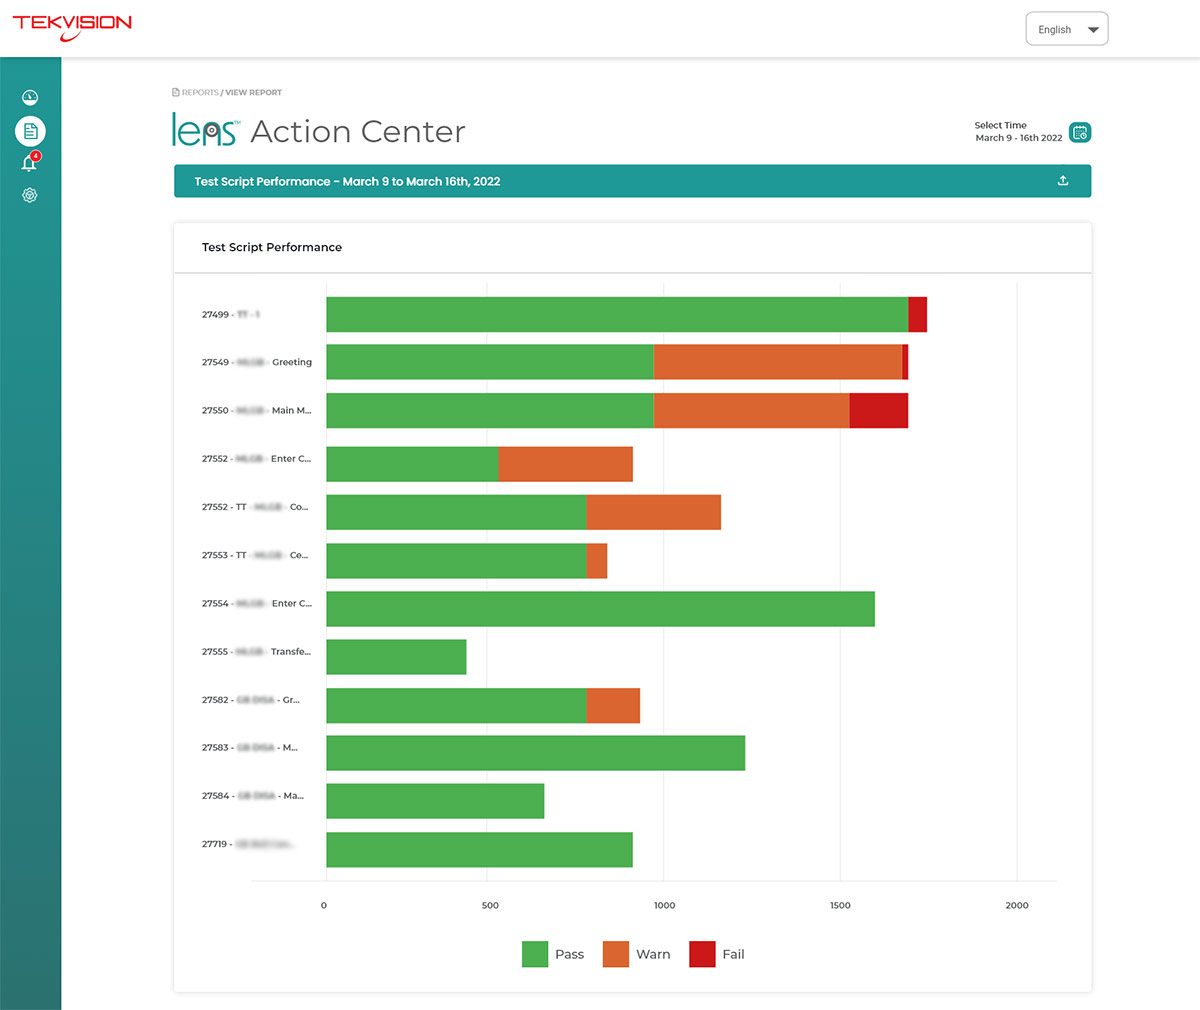 Lens Action Center provides Macro view dashboard results for CX Monitoring.